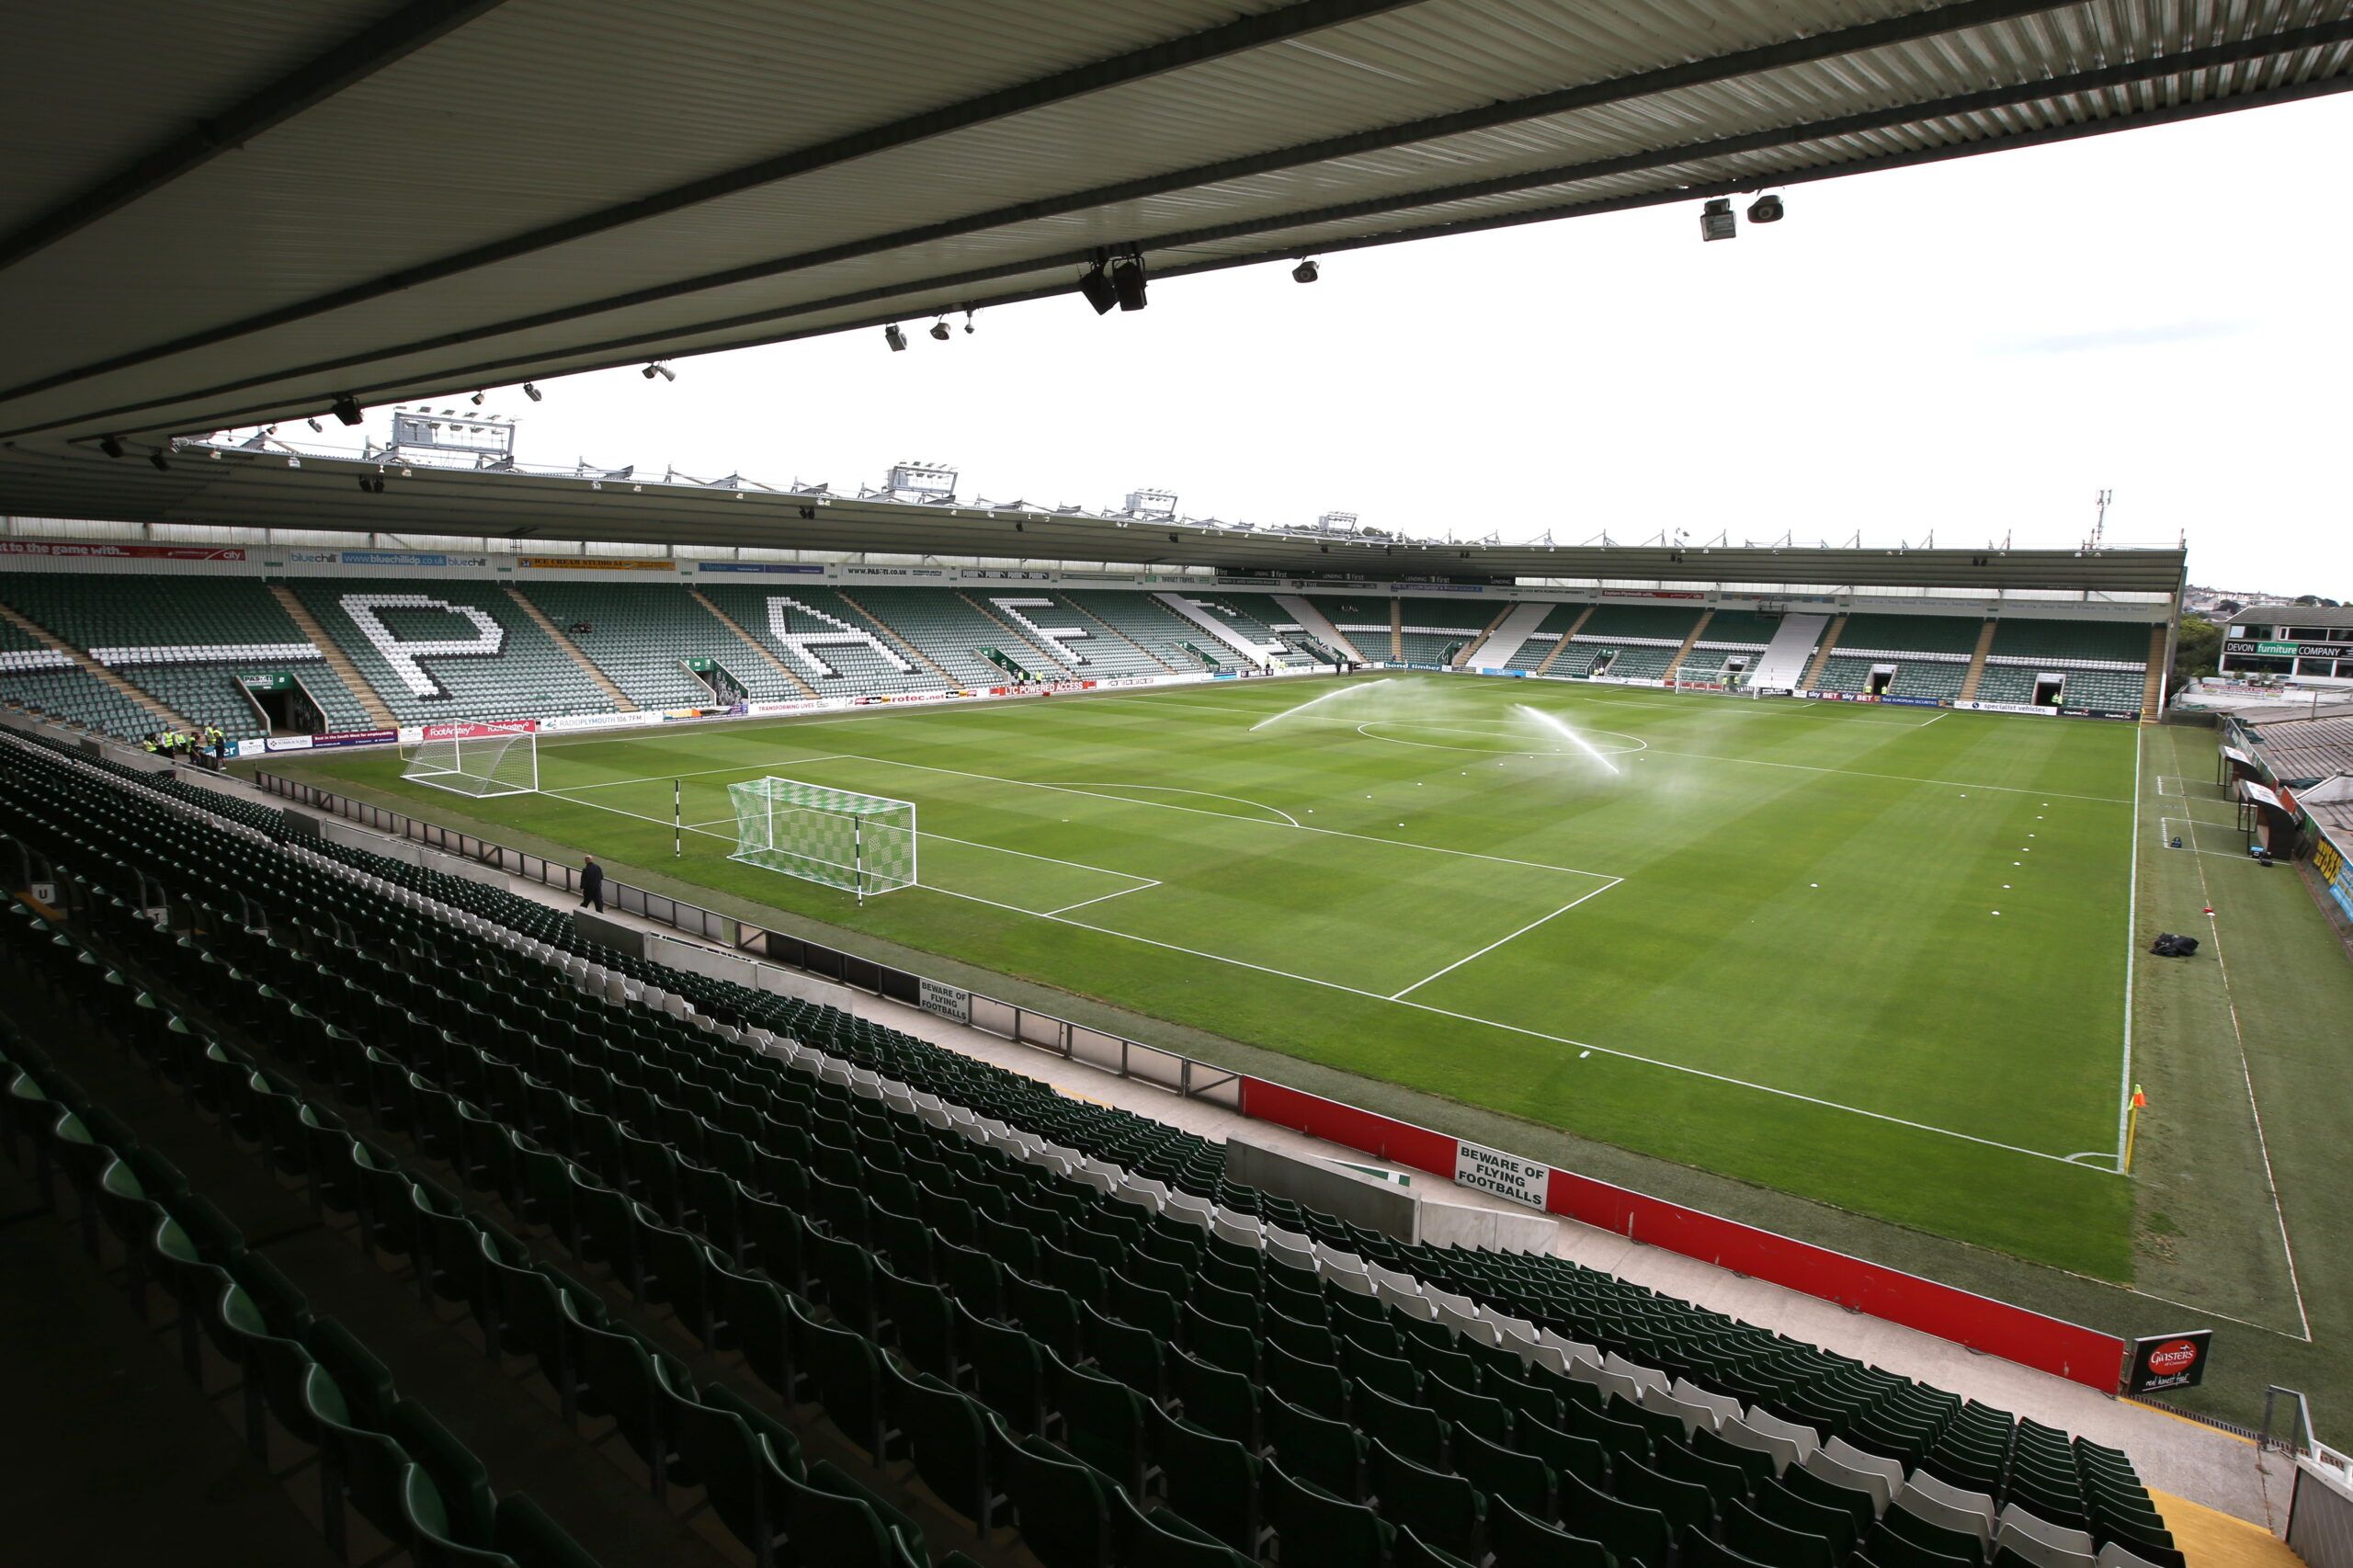 Football - Plymouth Argyle v Swansea City - Pre Season Friendly - Home Park - 14/15 - 27/7/14 
General view 
Mandatory Credit: Action Images / Paul Childs 
EDITORIAL USE ONLY.